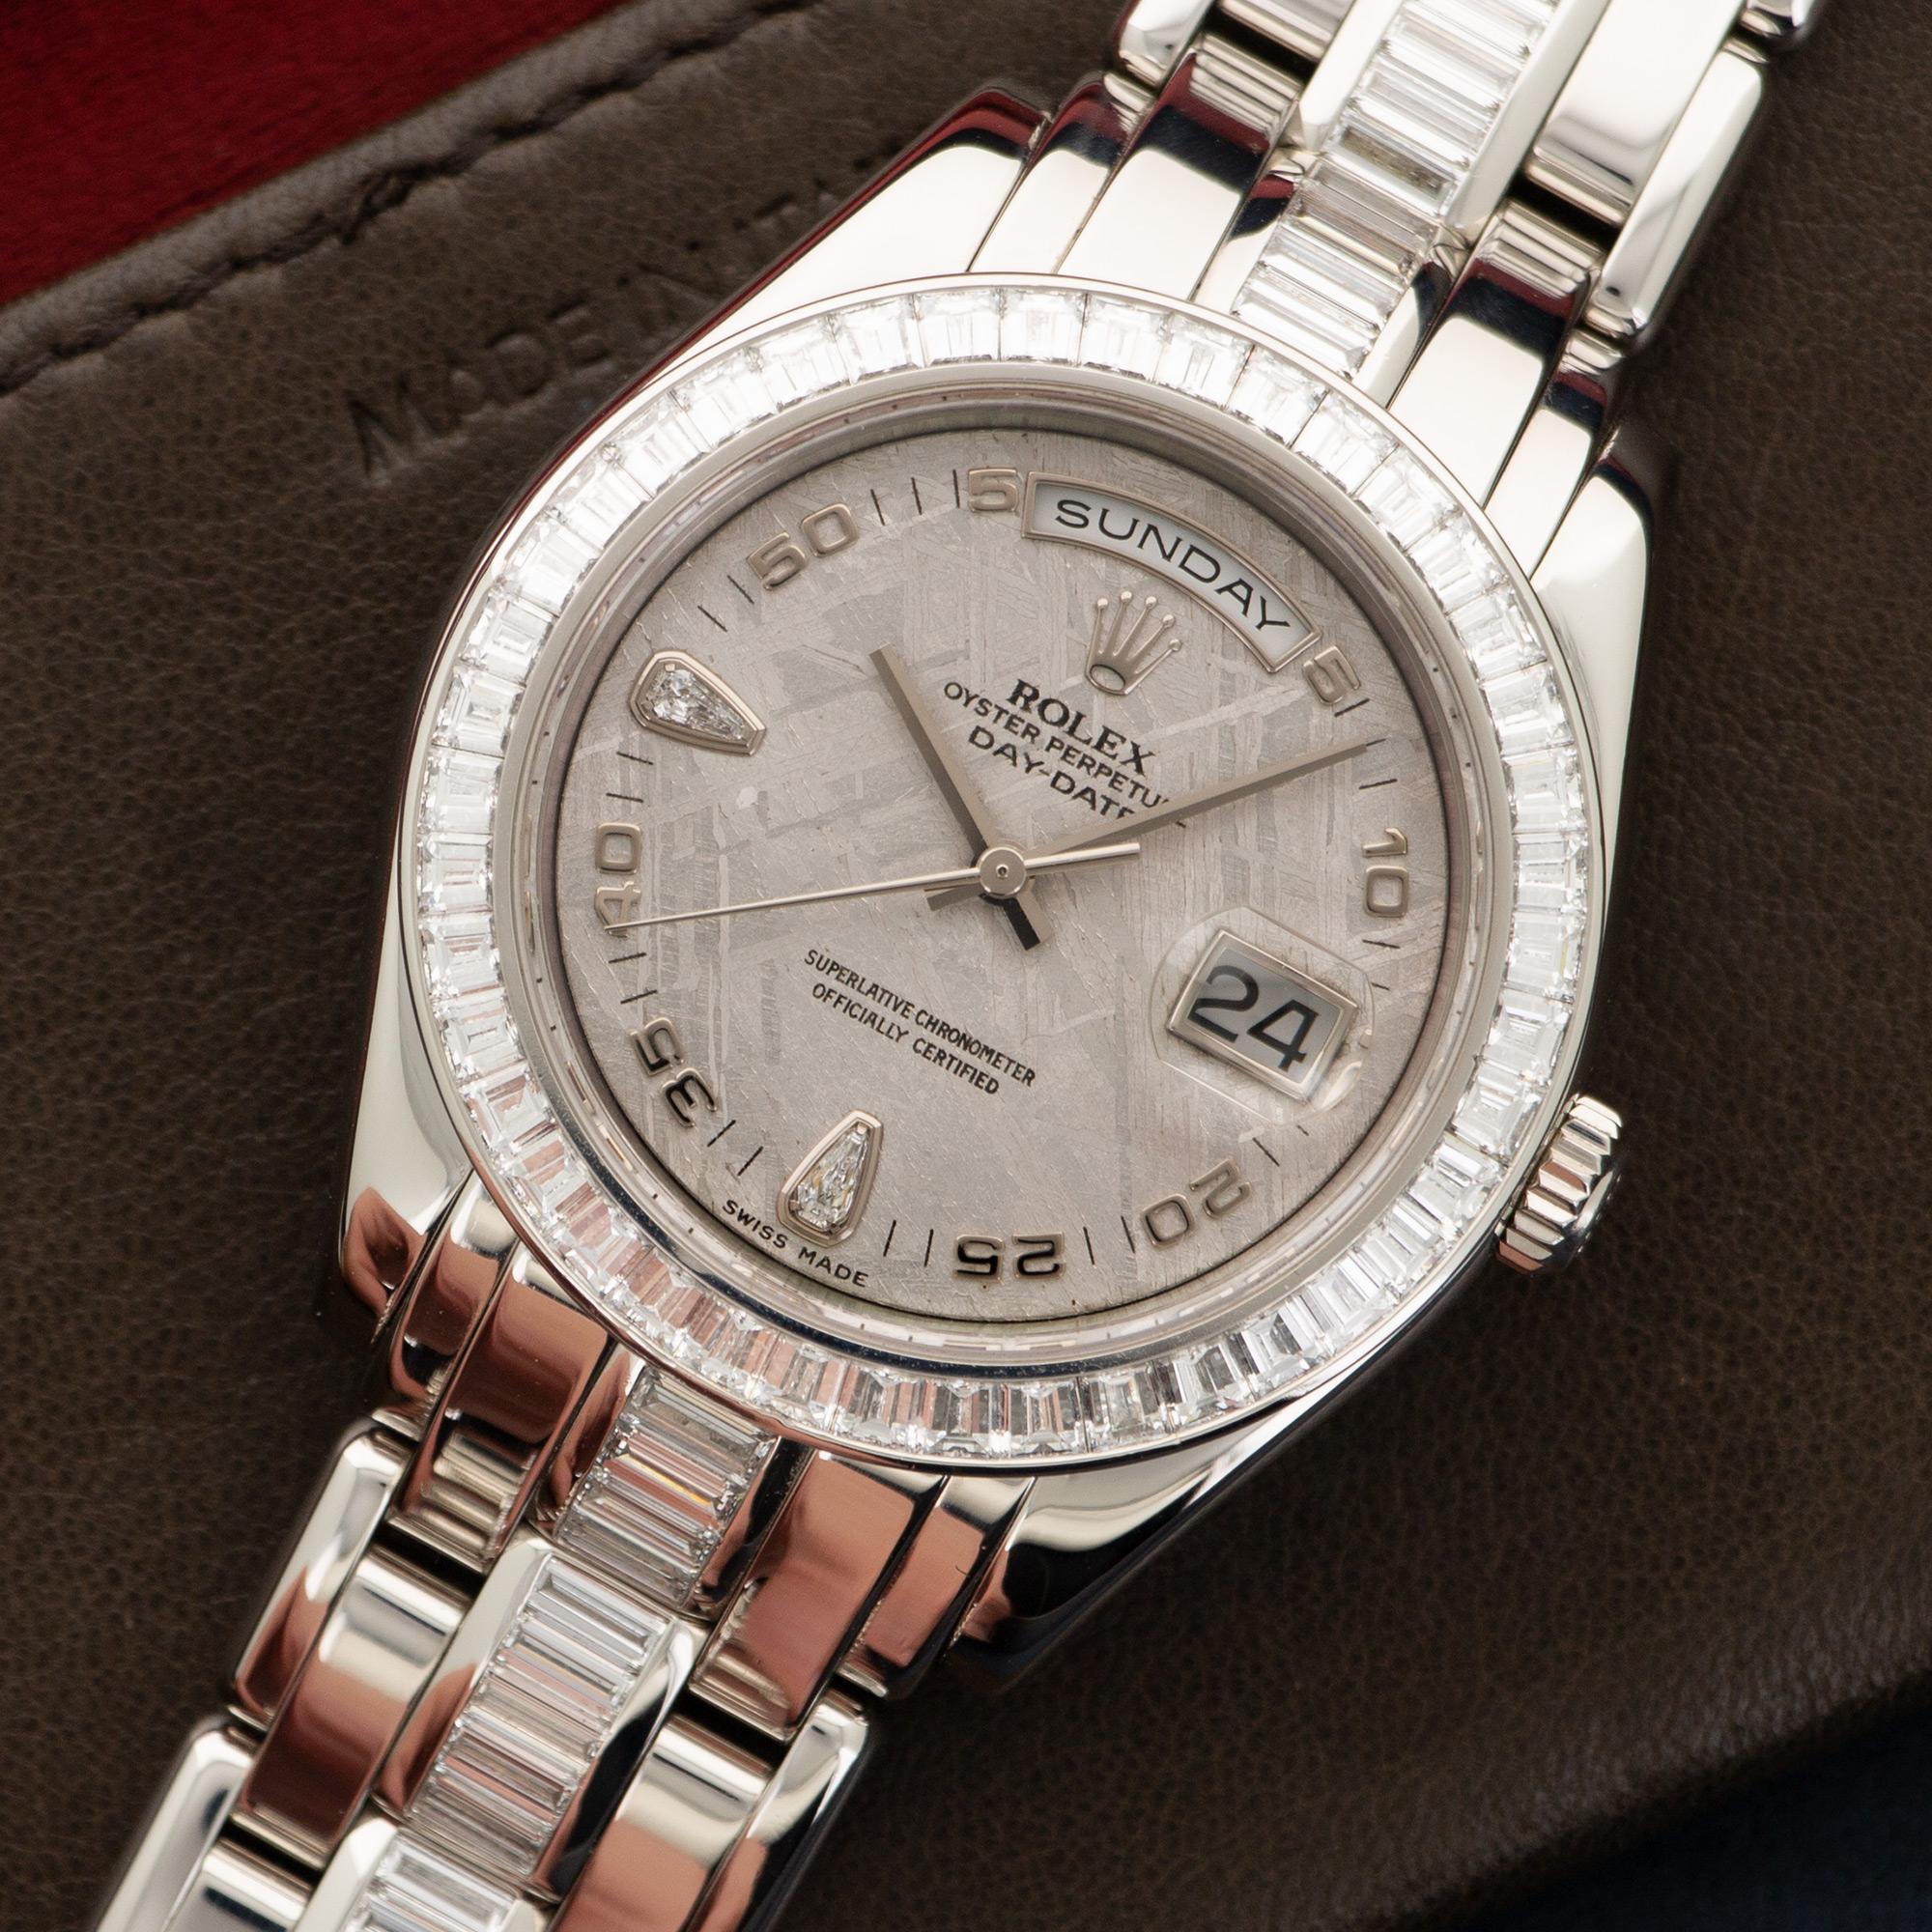 An All Original Platinum Day-Date Masterpiece with Original Baguette Diamond Bracelet, by Rolex. Model Number 18956. Automatic Movement. Meteriote Dial with Diamond Markers. Serial Number Dates the Watch to the Mid 2000's.